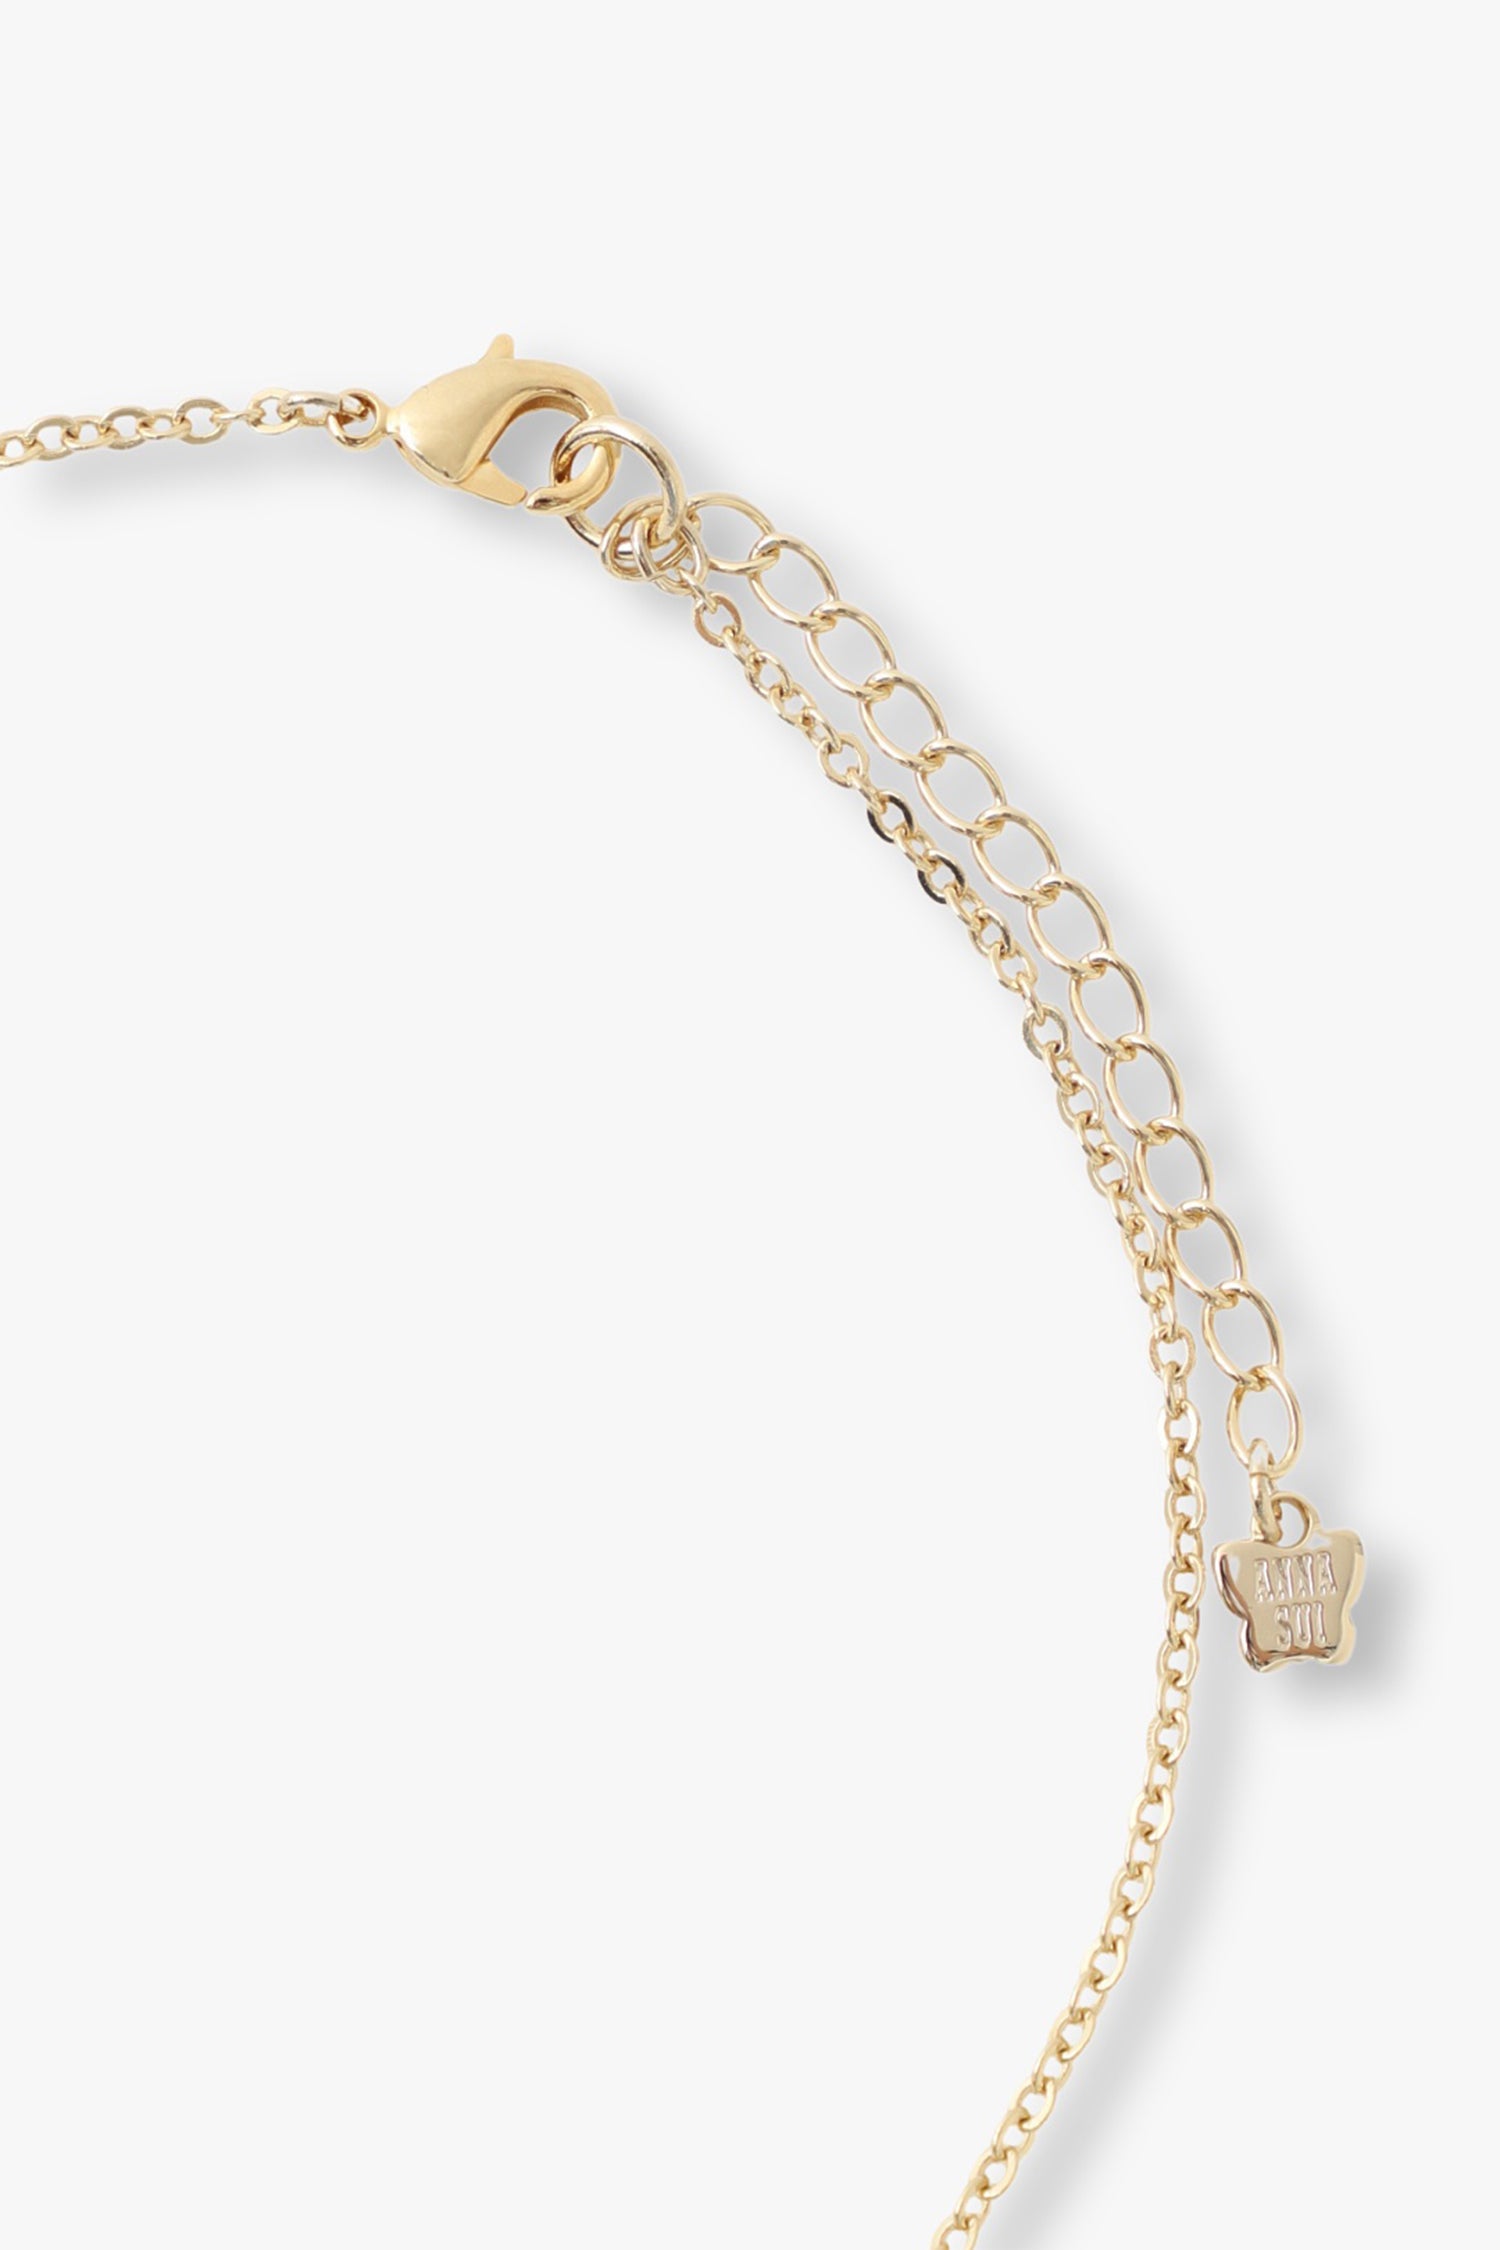 Gold color plating chain, a lobster claw, with large links for adjustability, Anna Sui imprint on a tag